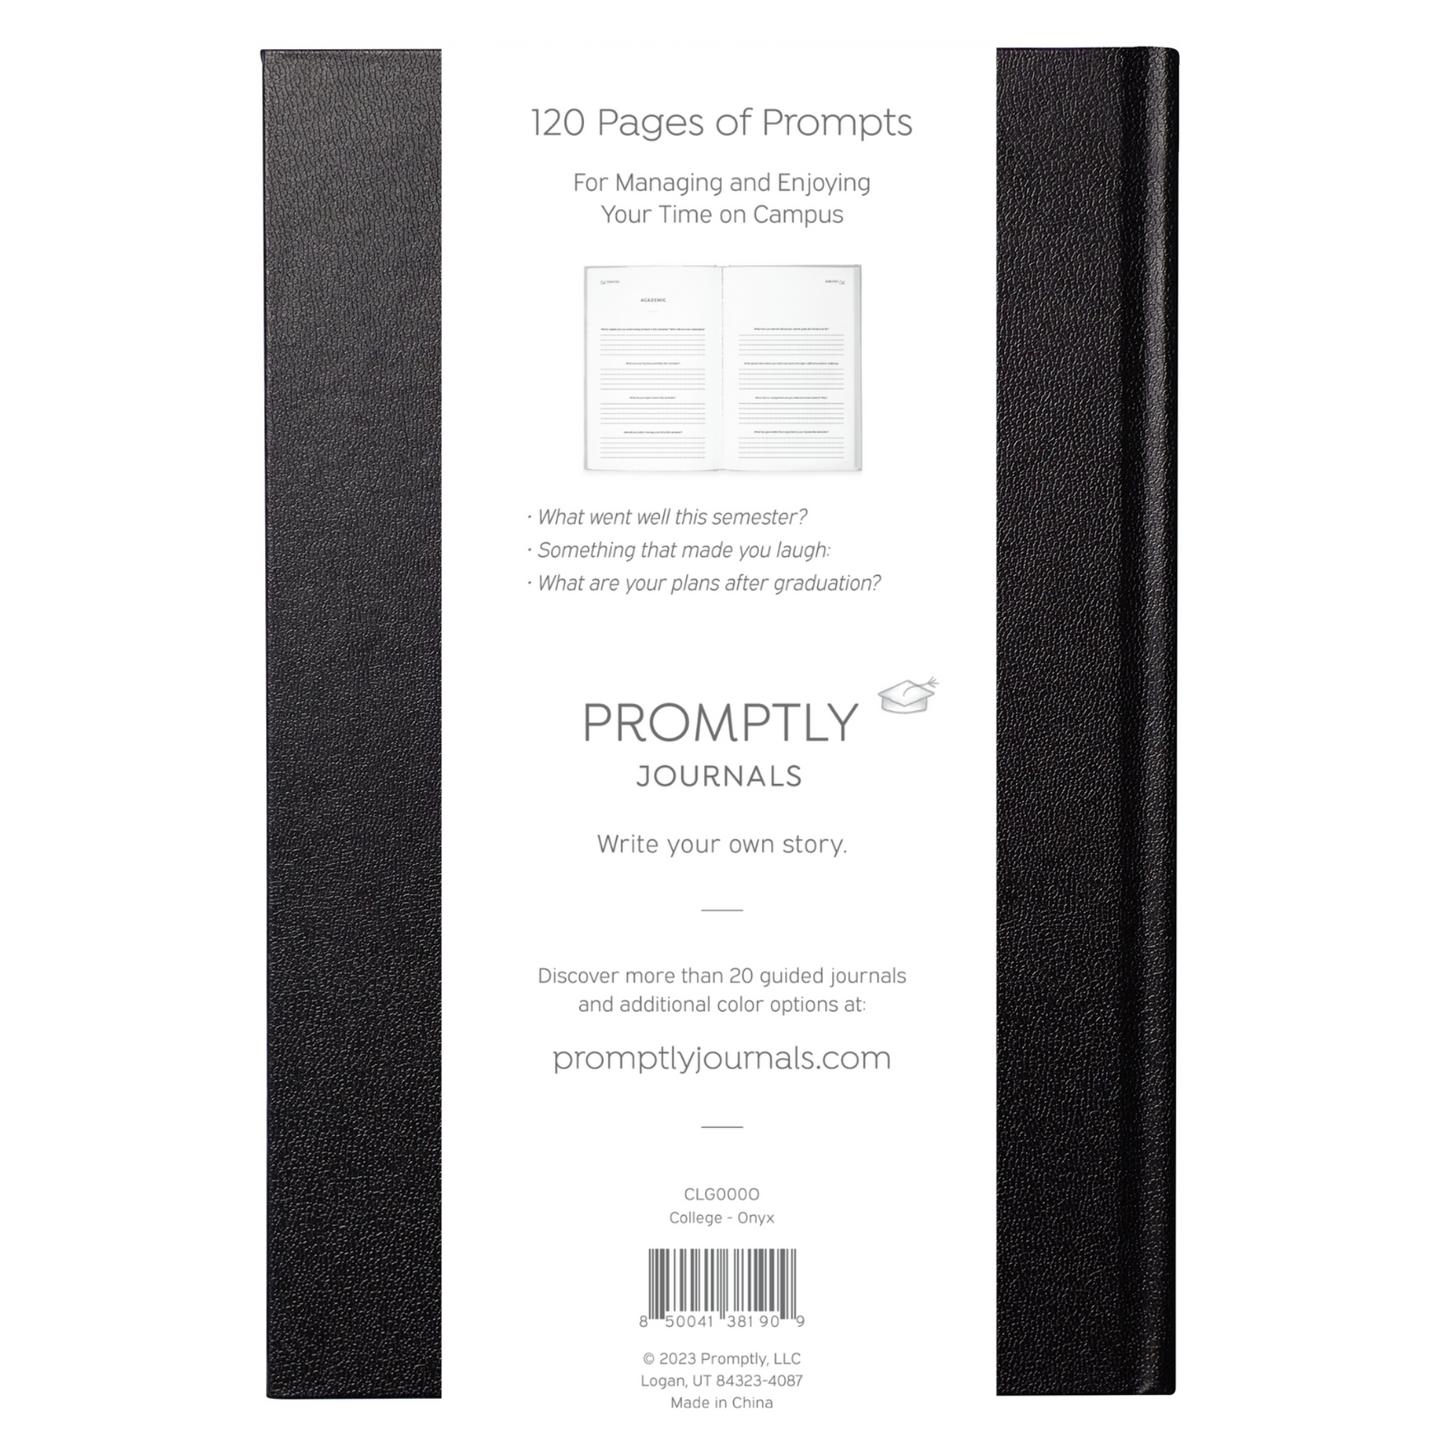 My College Journal: From First Day to Graduation (Onyx) by Promptly Journals